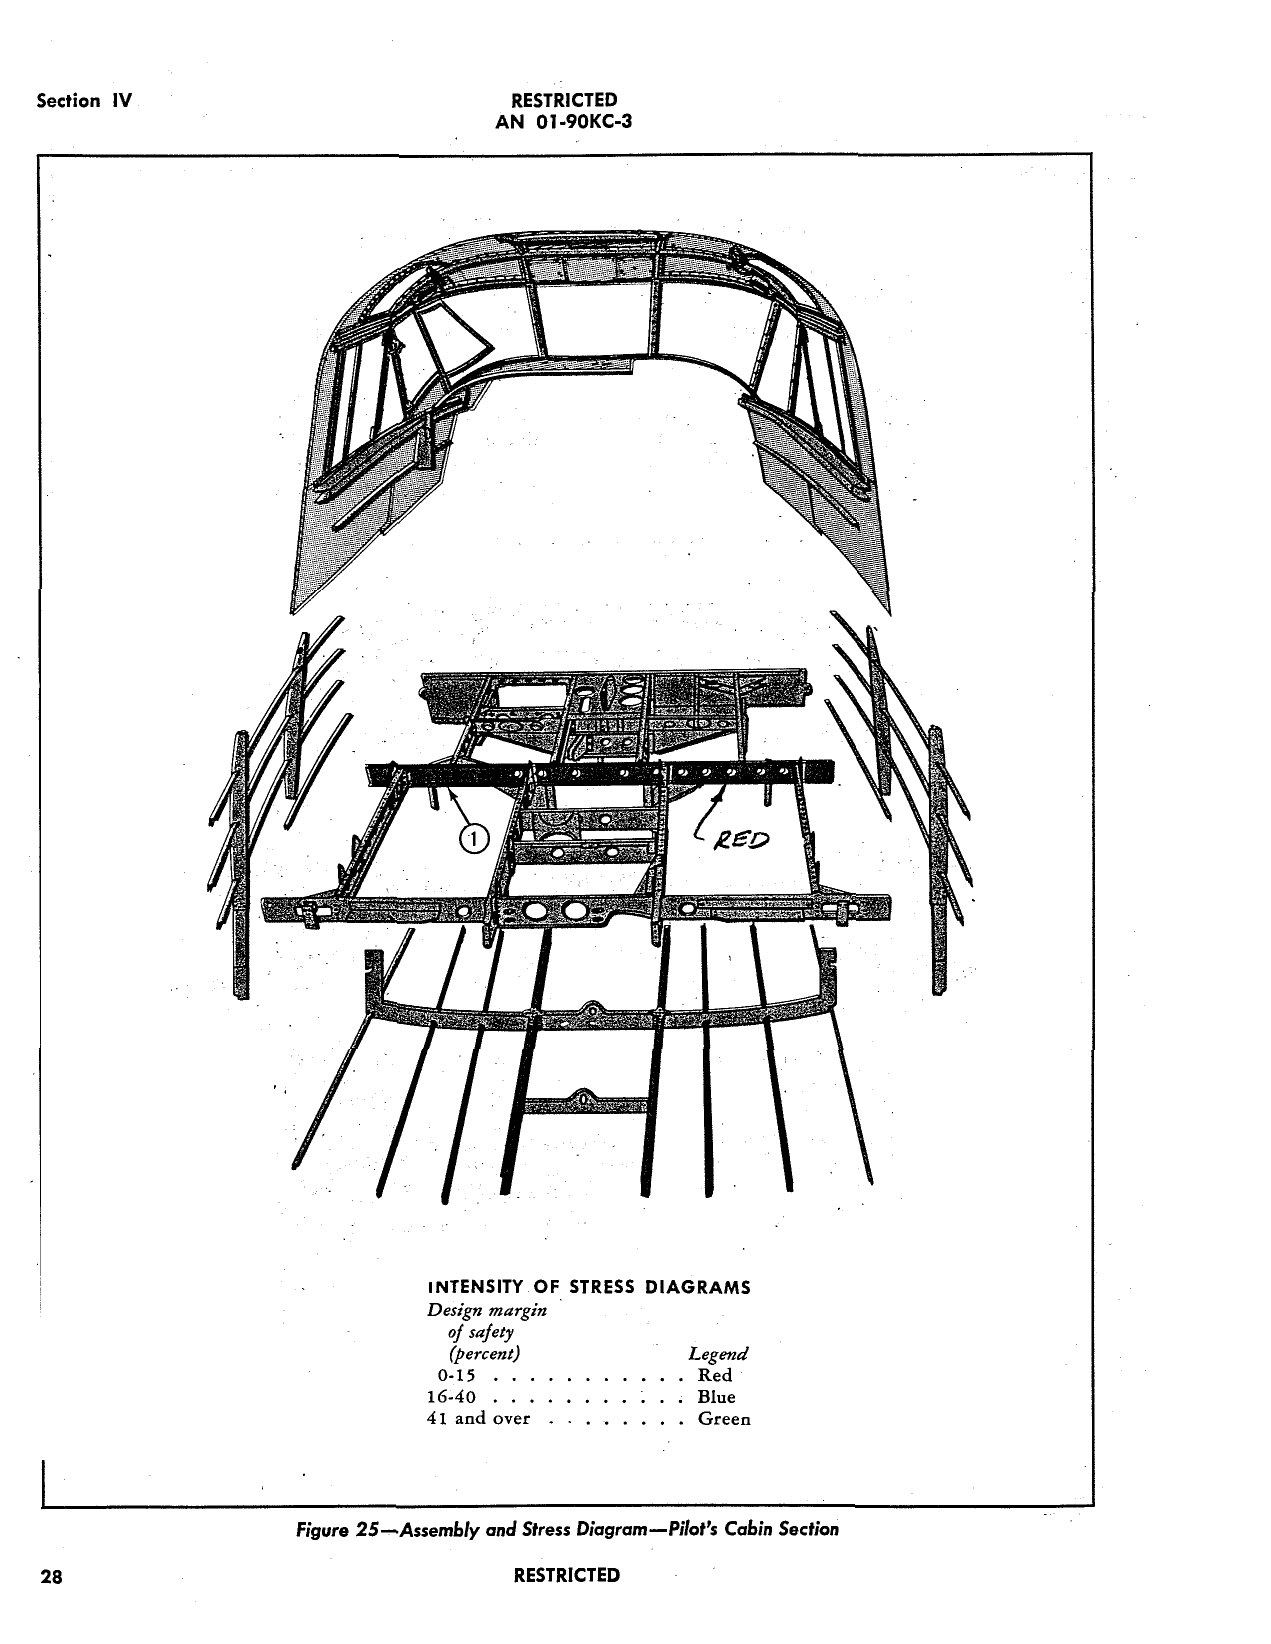 Sample page 32 from AirCorps Library document: Structural Repair Instructions - AT-11